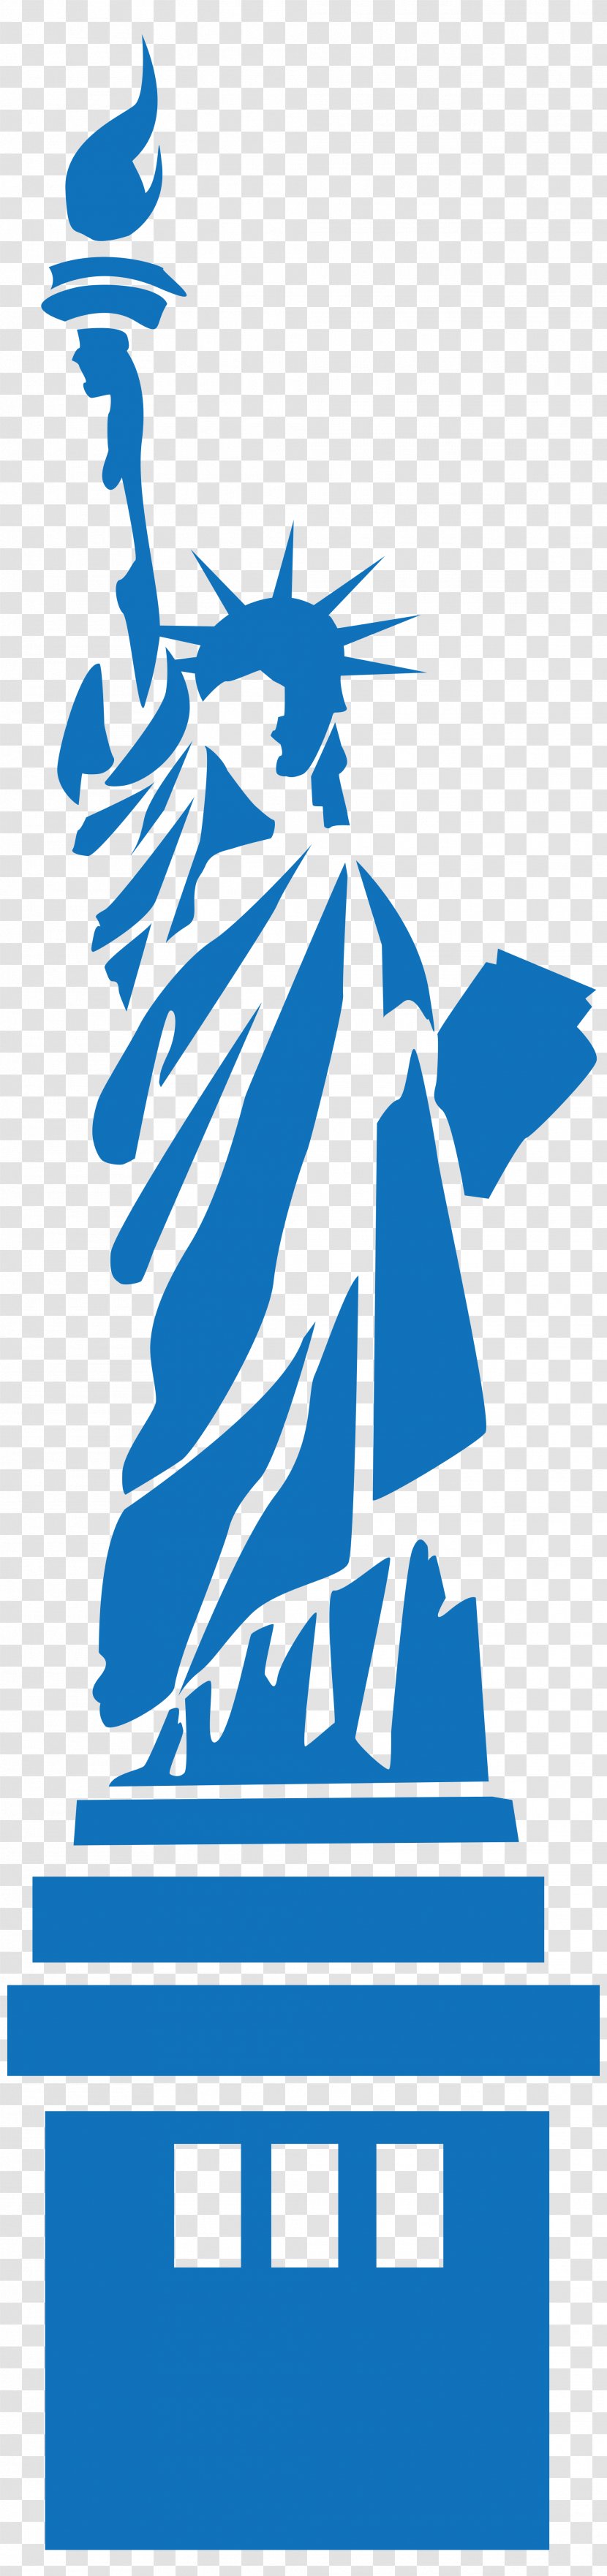 Statue Of Liberty Clip Art - Silhouette Transparent PNG